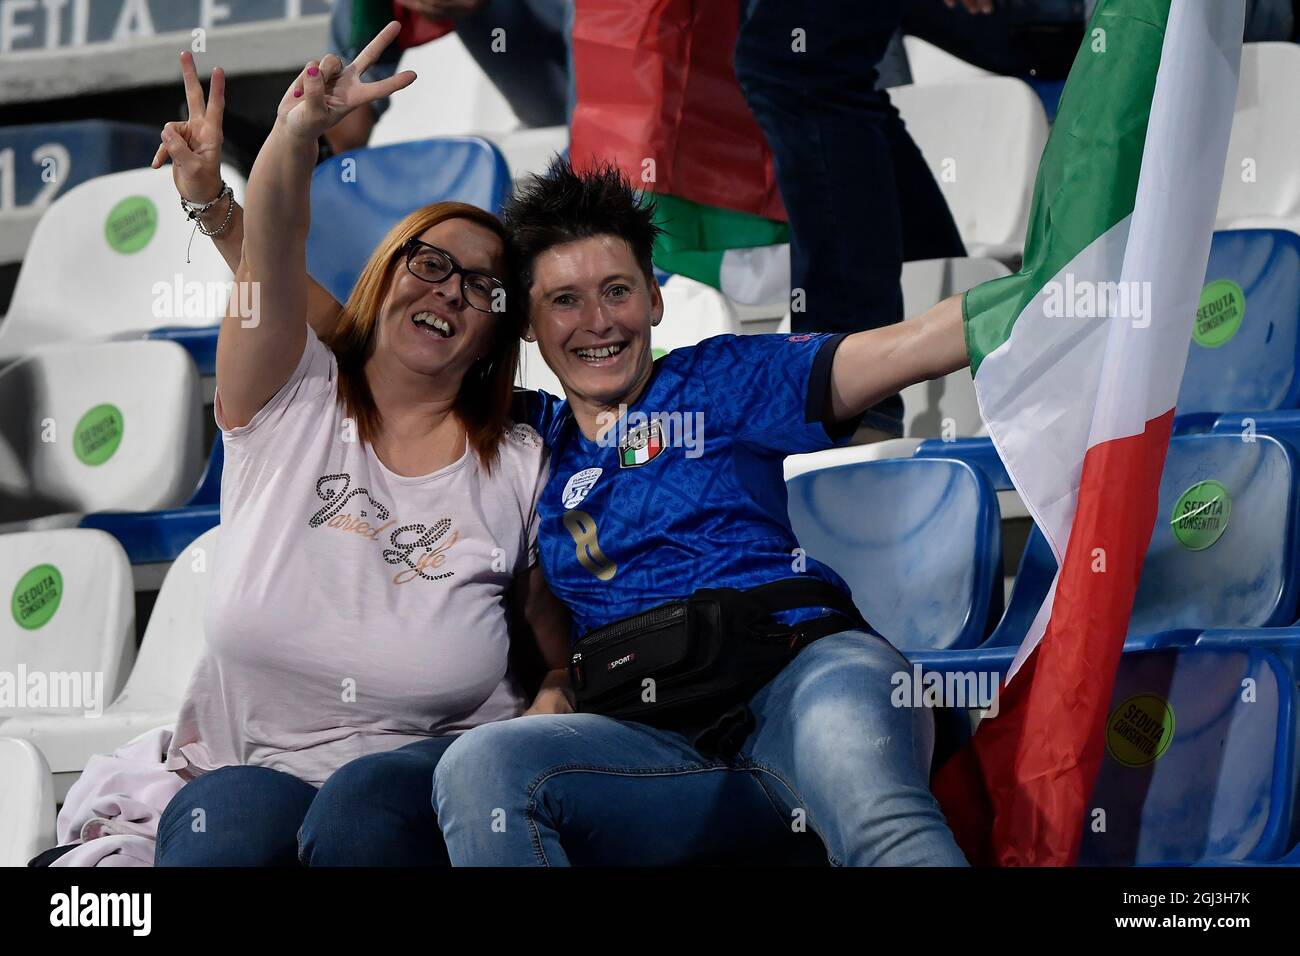 Reggio Emilia, Italy. 08th Sep, 2021. Italian fans cheer on during the  Qatar 2022 world cup qualifying football match between Italy and Lithuania  at Citta del tricolore stadium in Reggio Emilia (Italy),